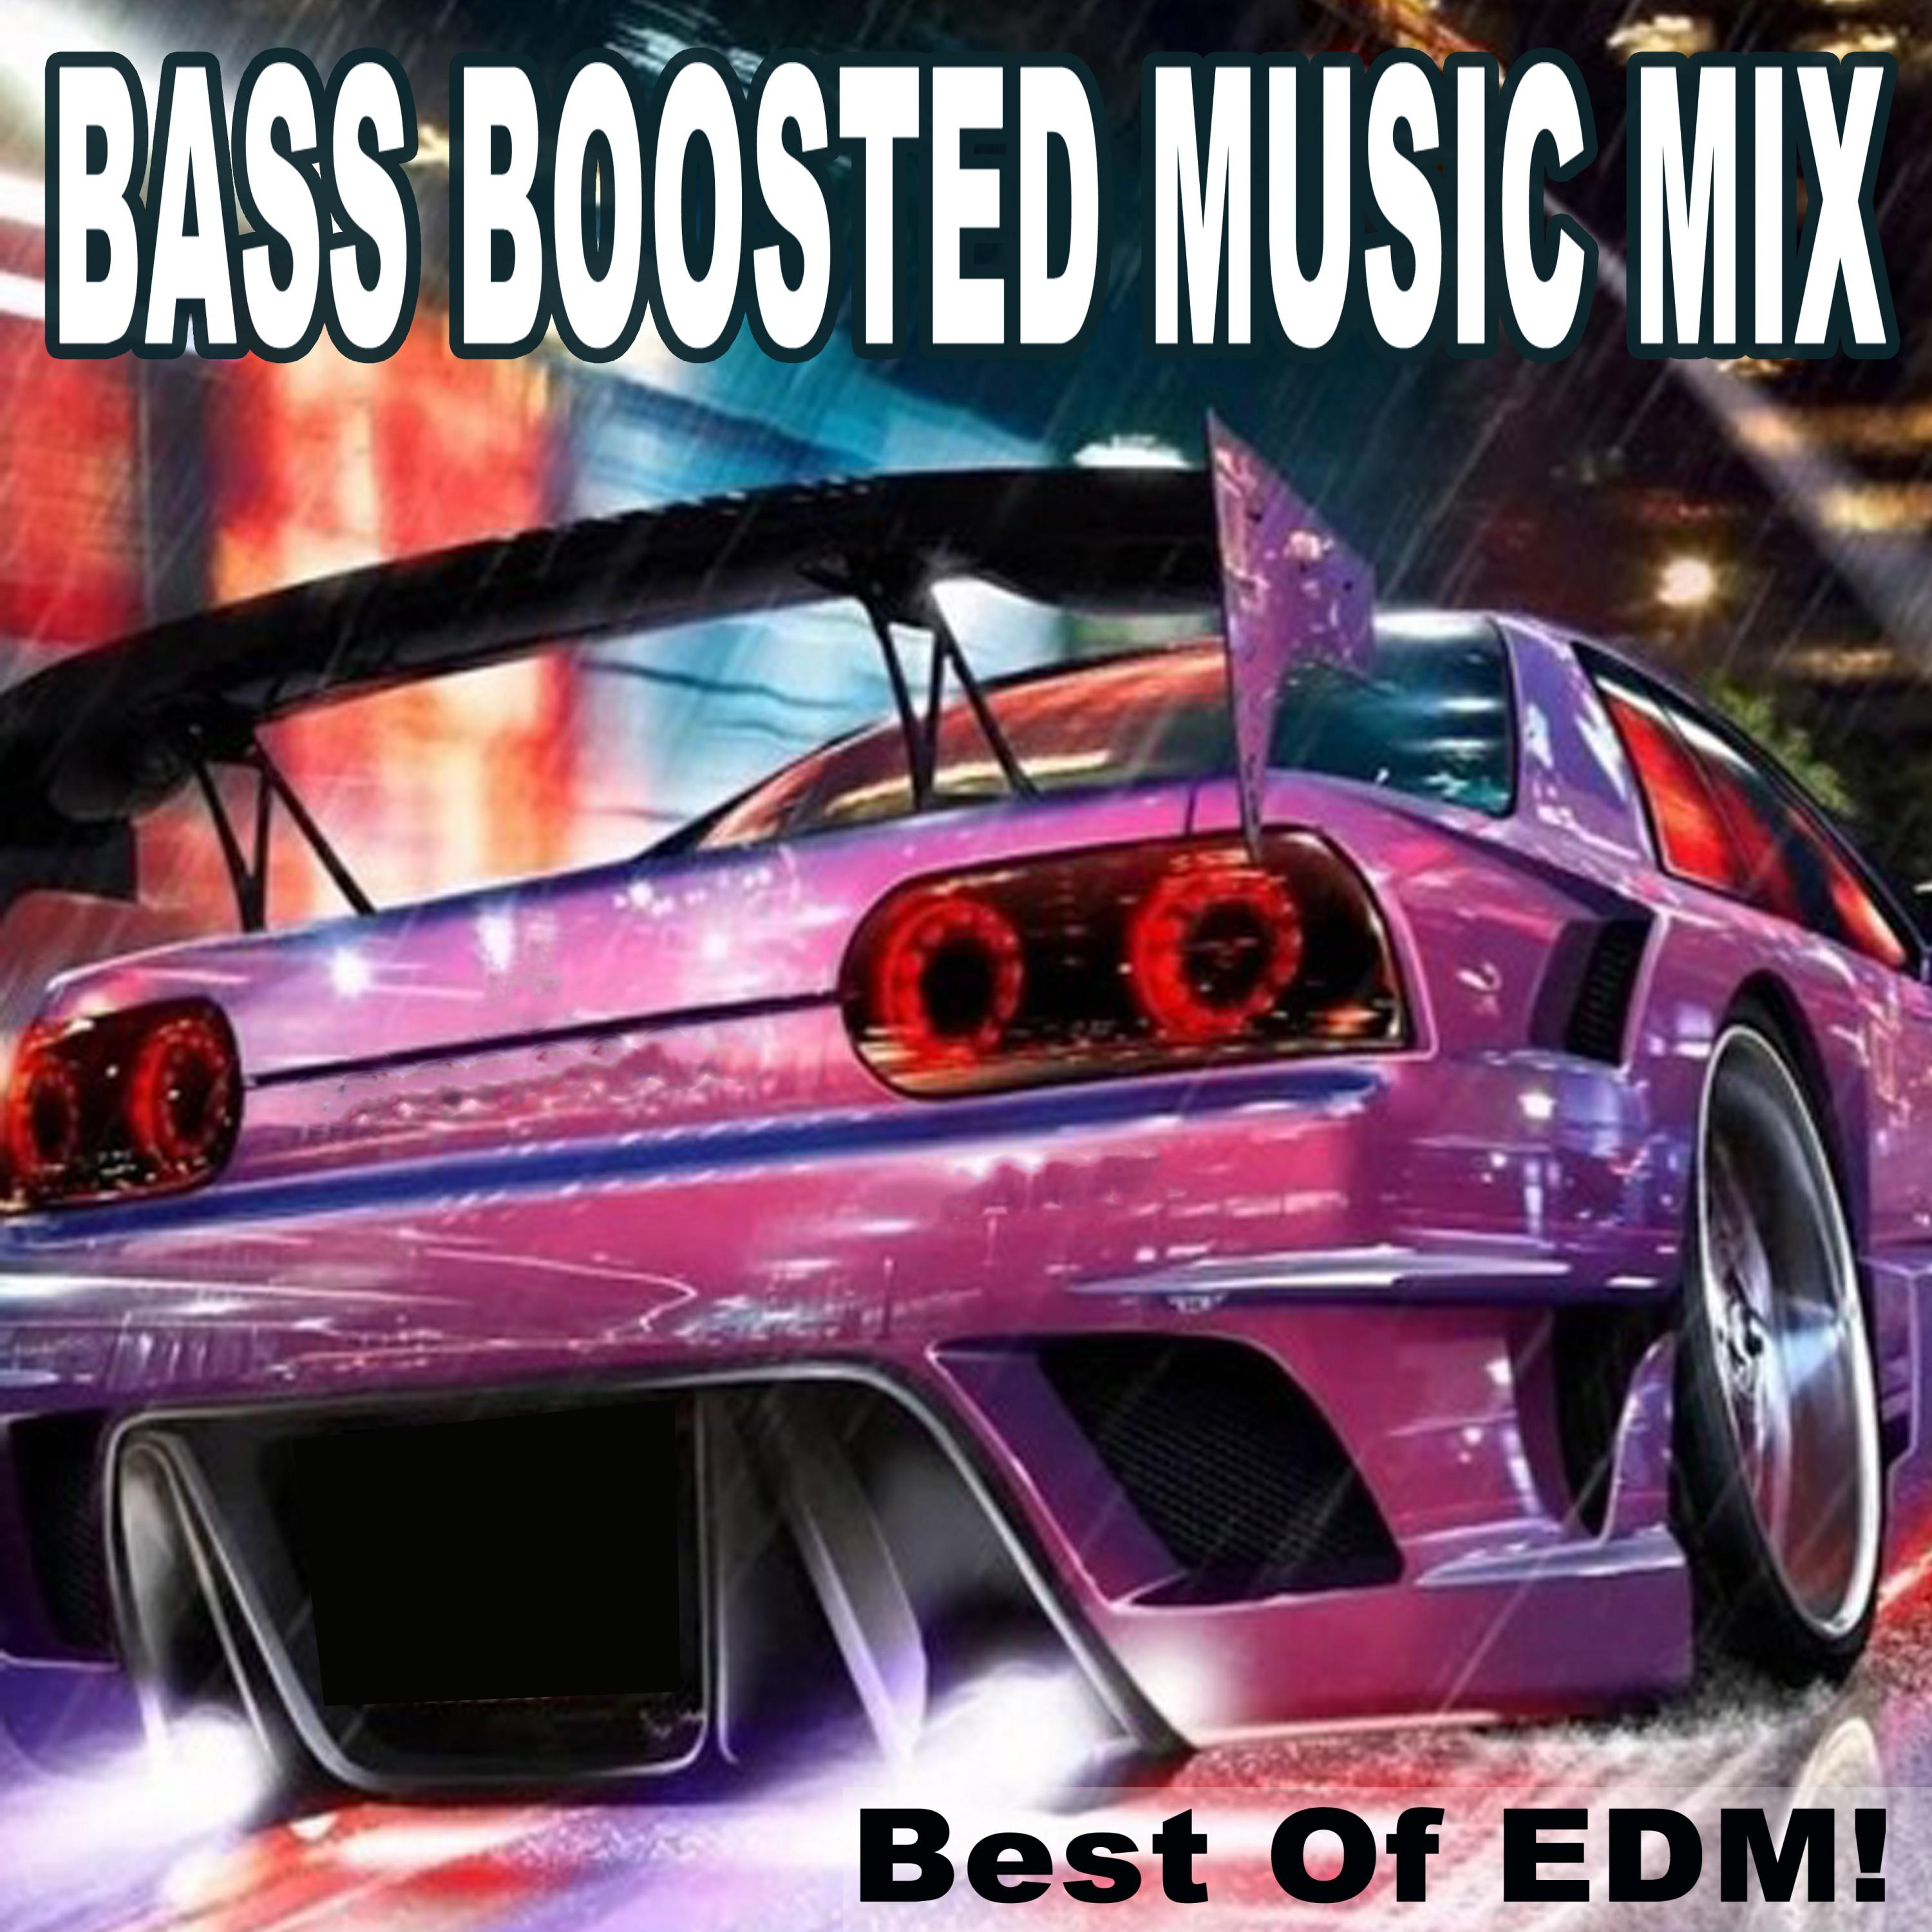 Bass Boosted Music Mix (Best of EDM!)